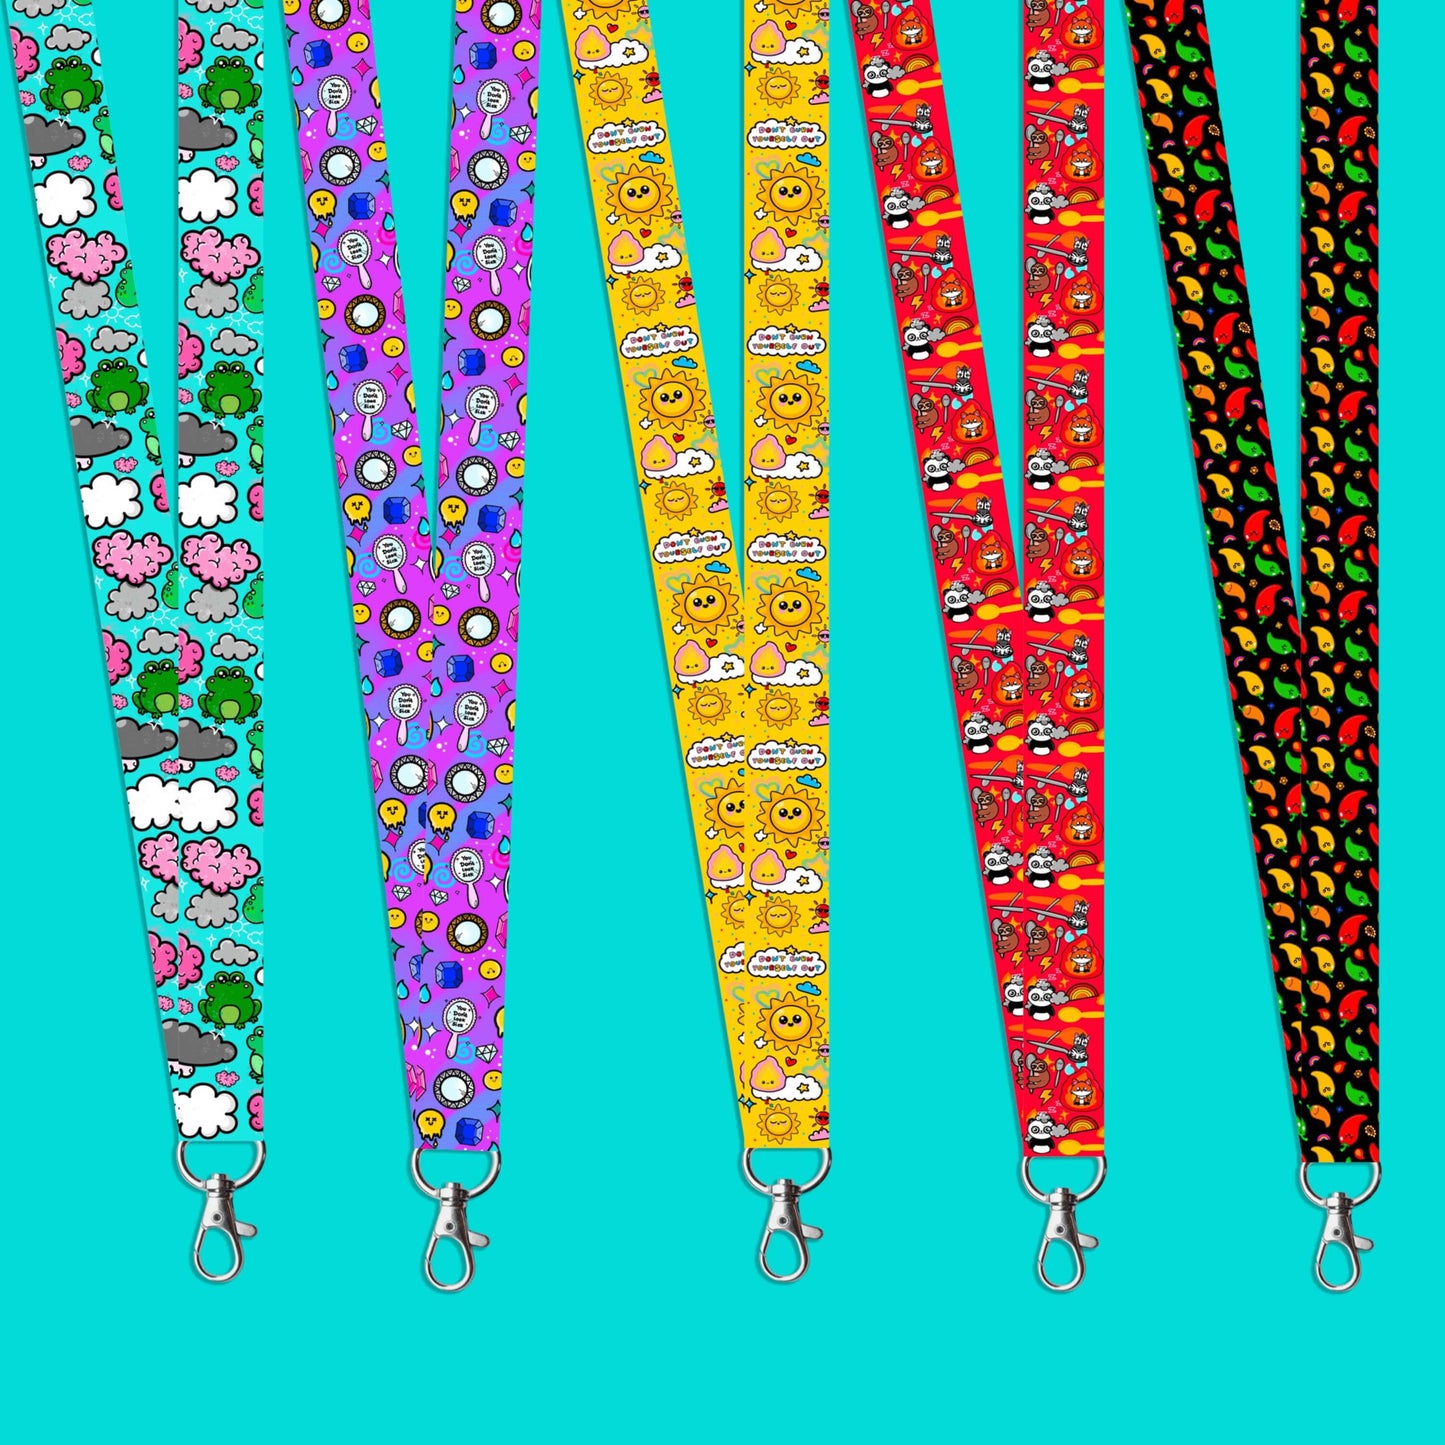 The Don't Burn Yourself Out Lanyard on a blue background with various other innabox lanyards. The lanyard is yellow with various kawaii face sunshines, sparkles, hearts, pink flames and pink, blue and white clouds with don't burn yourself out inside in rainbow. Design inspired by the self care movement.